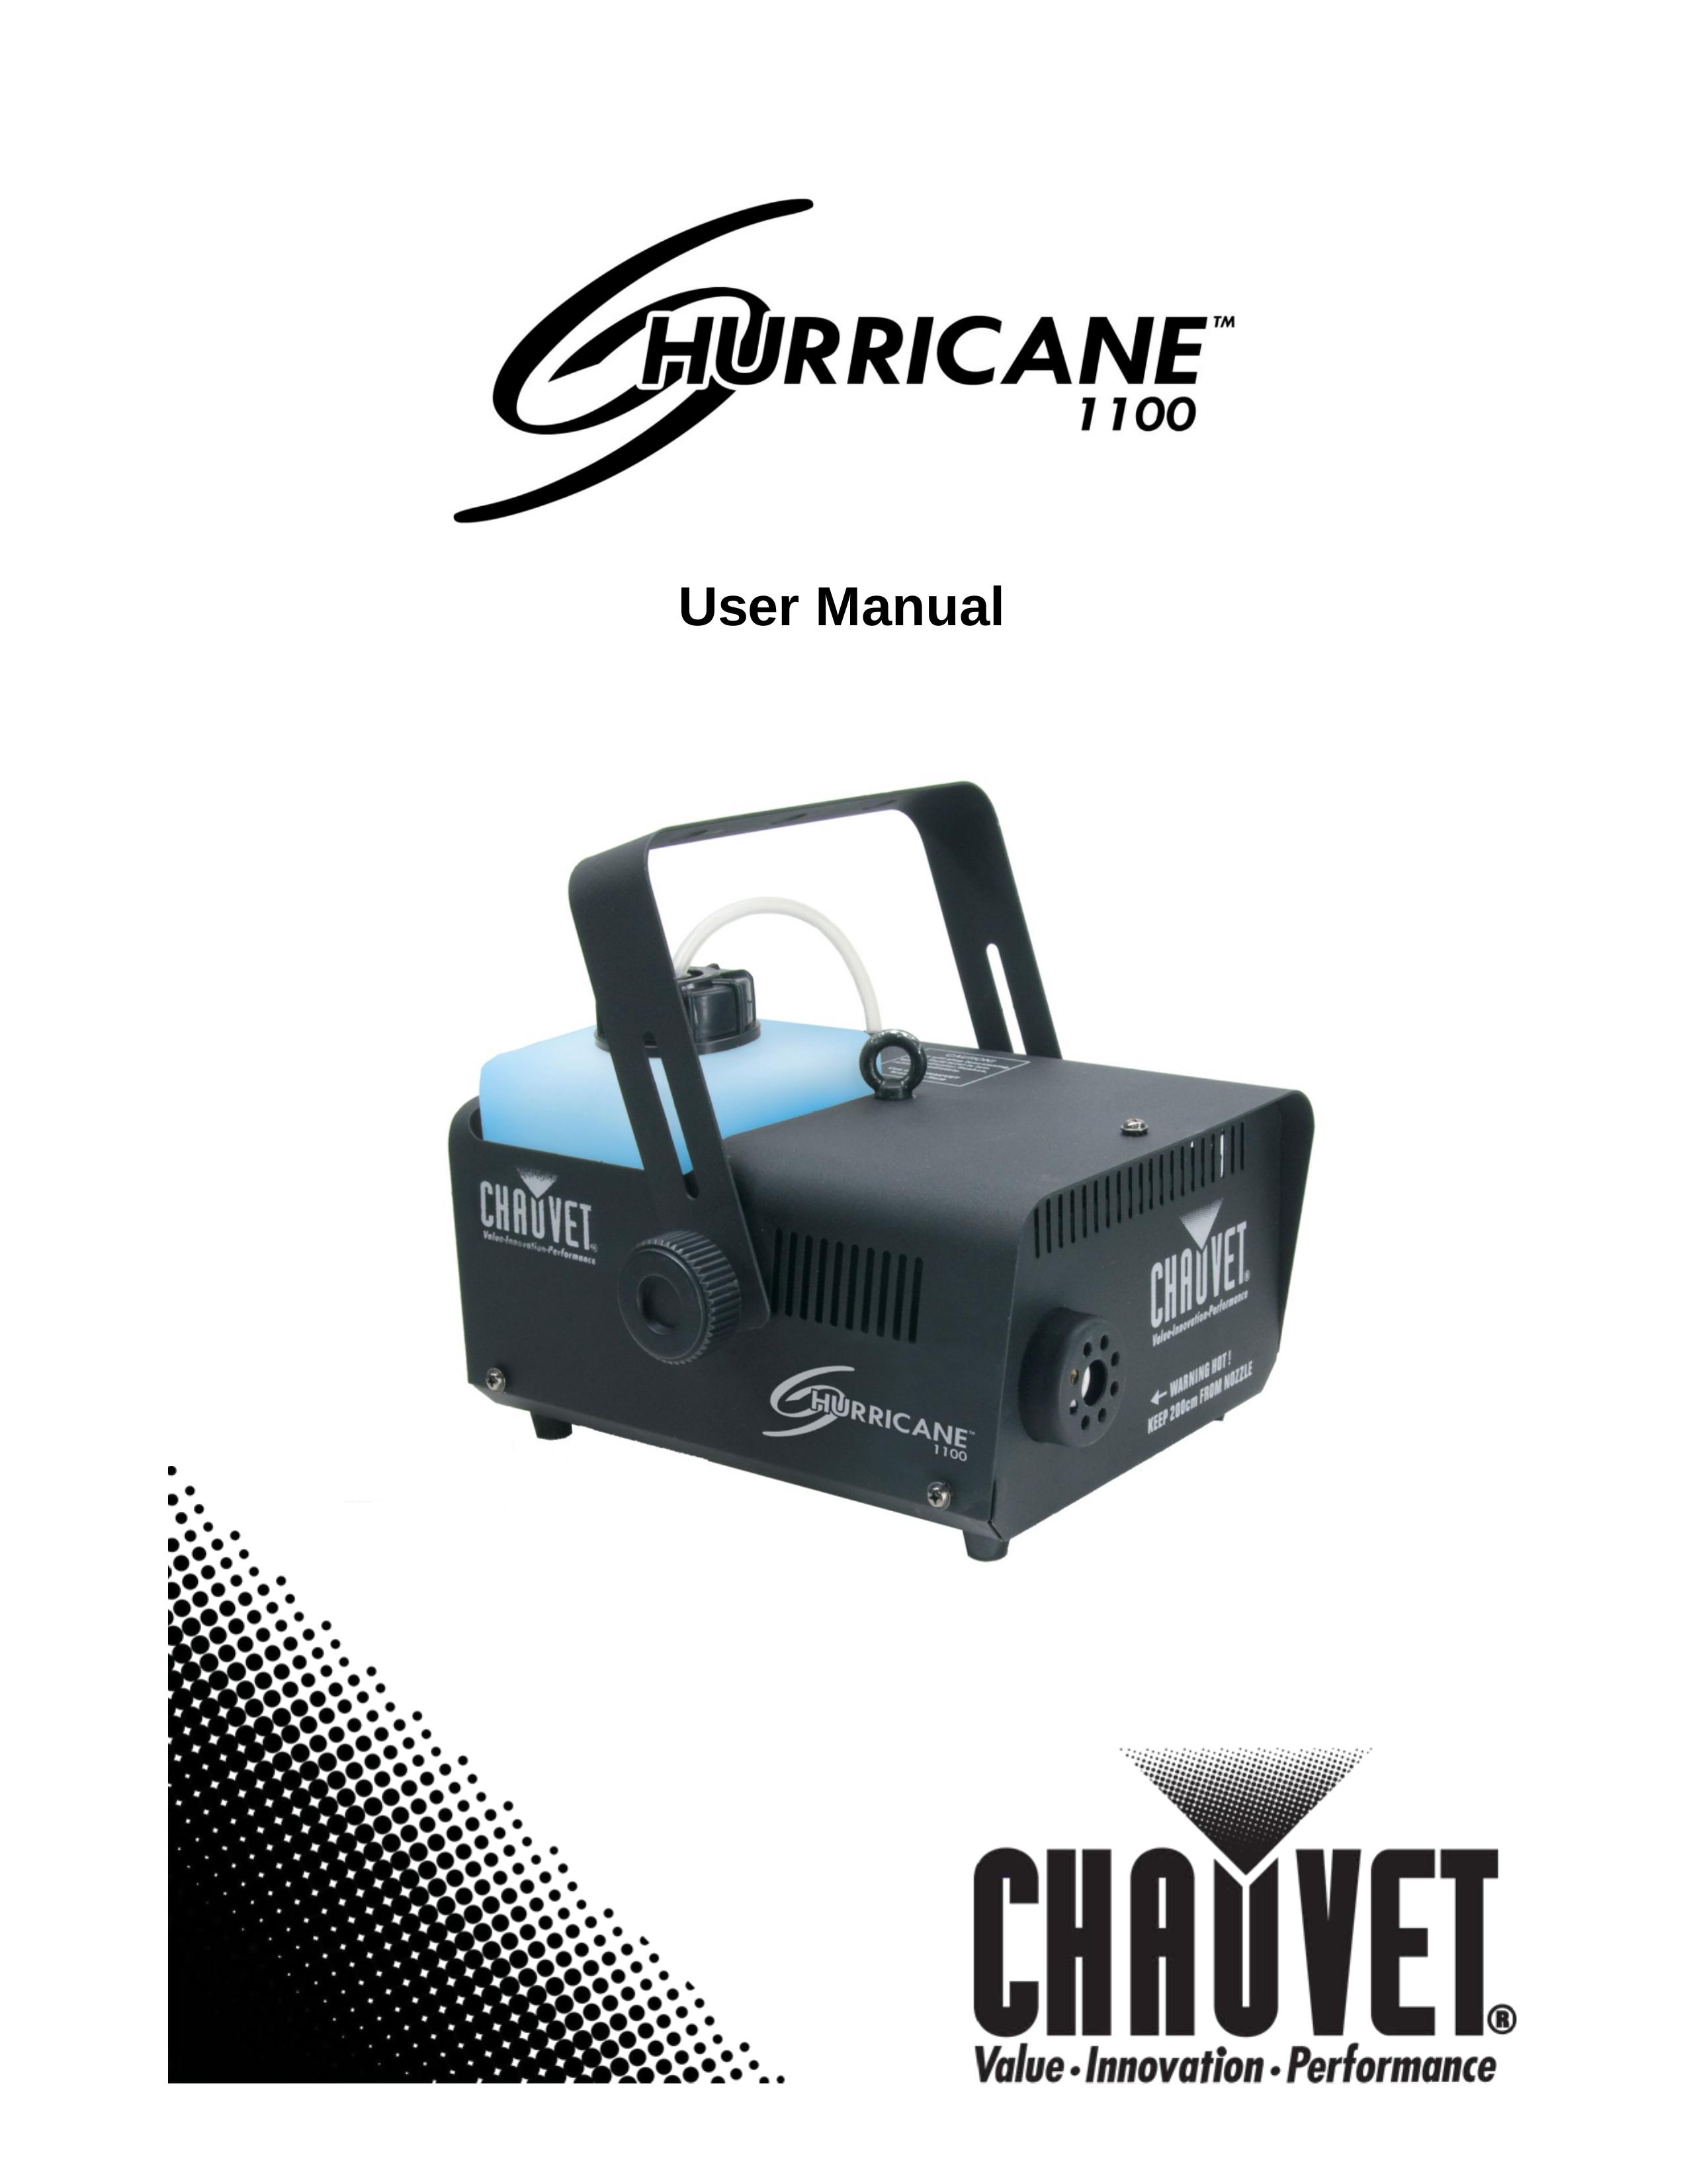 Chauvet Hurricane 1100 Insect Control Equipment User Manual